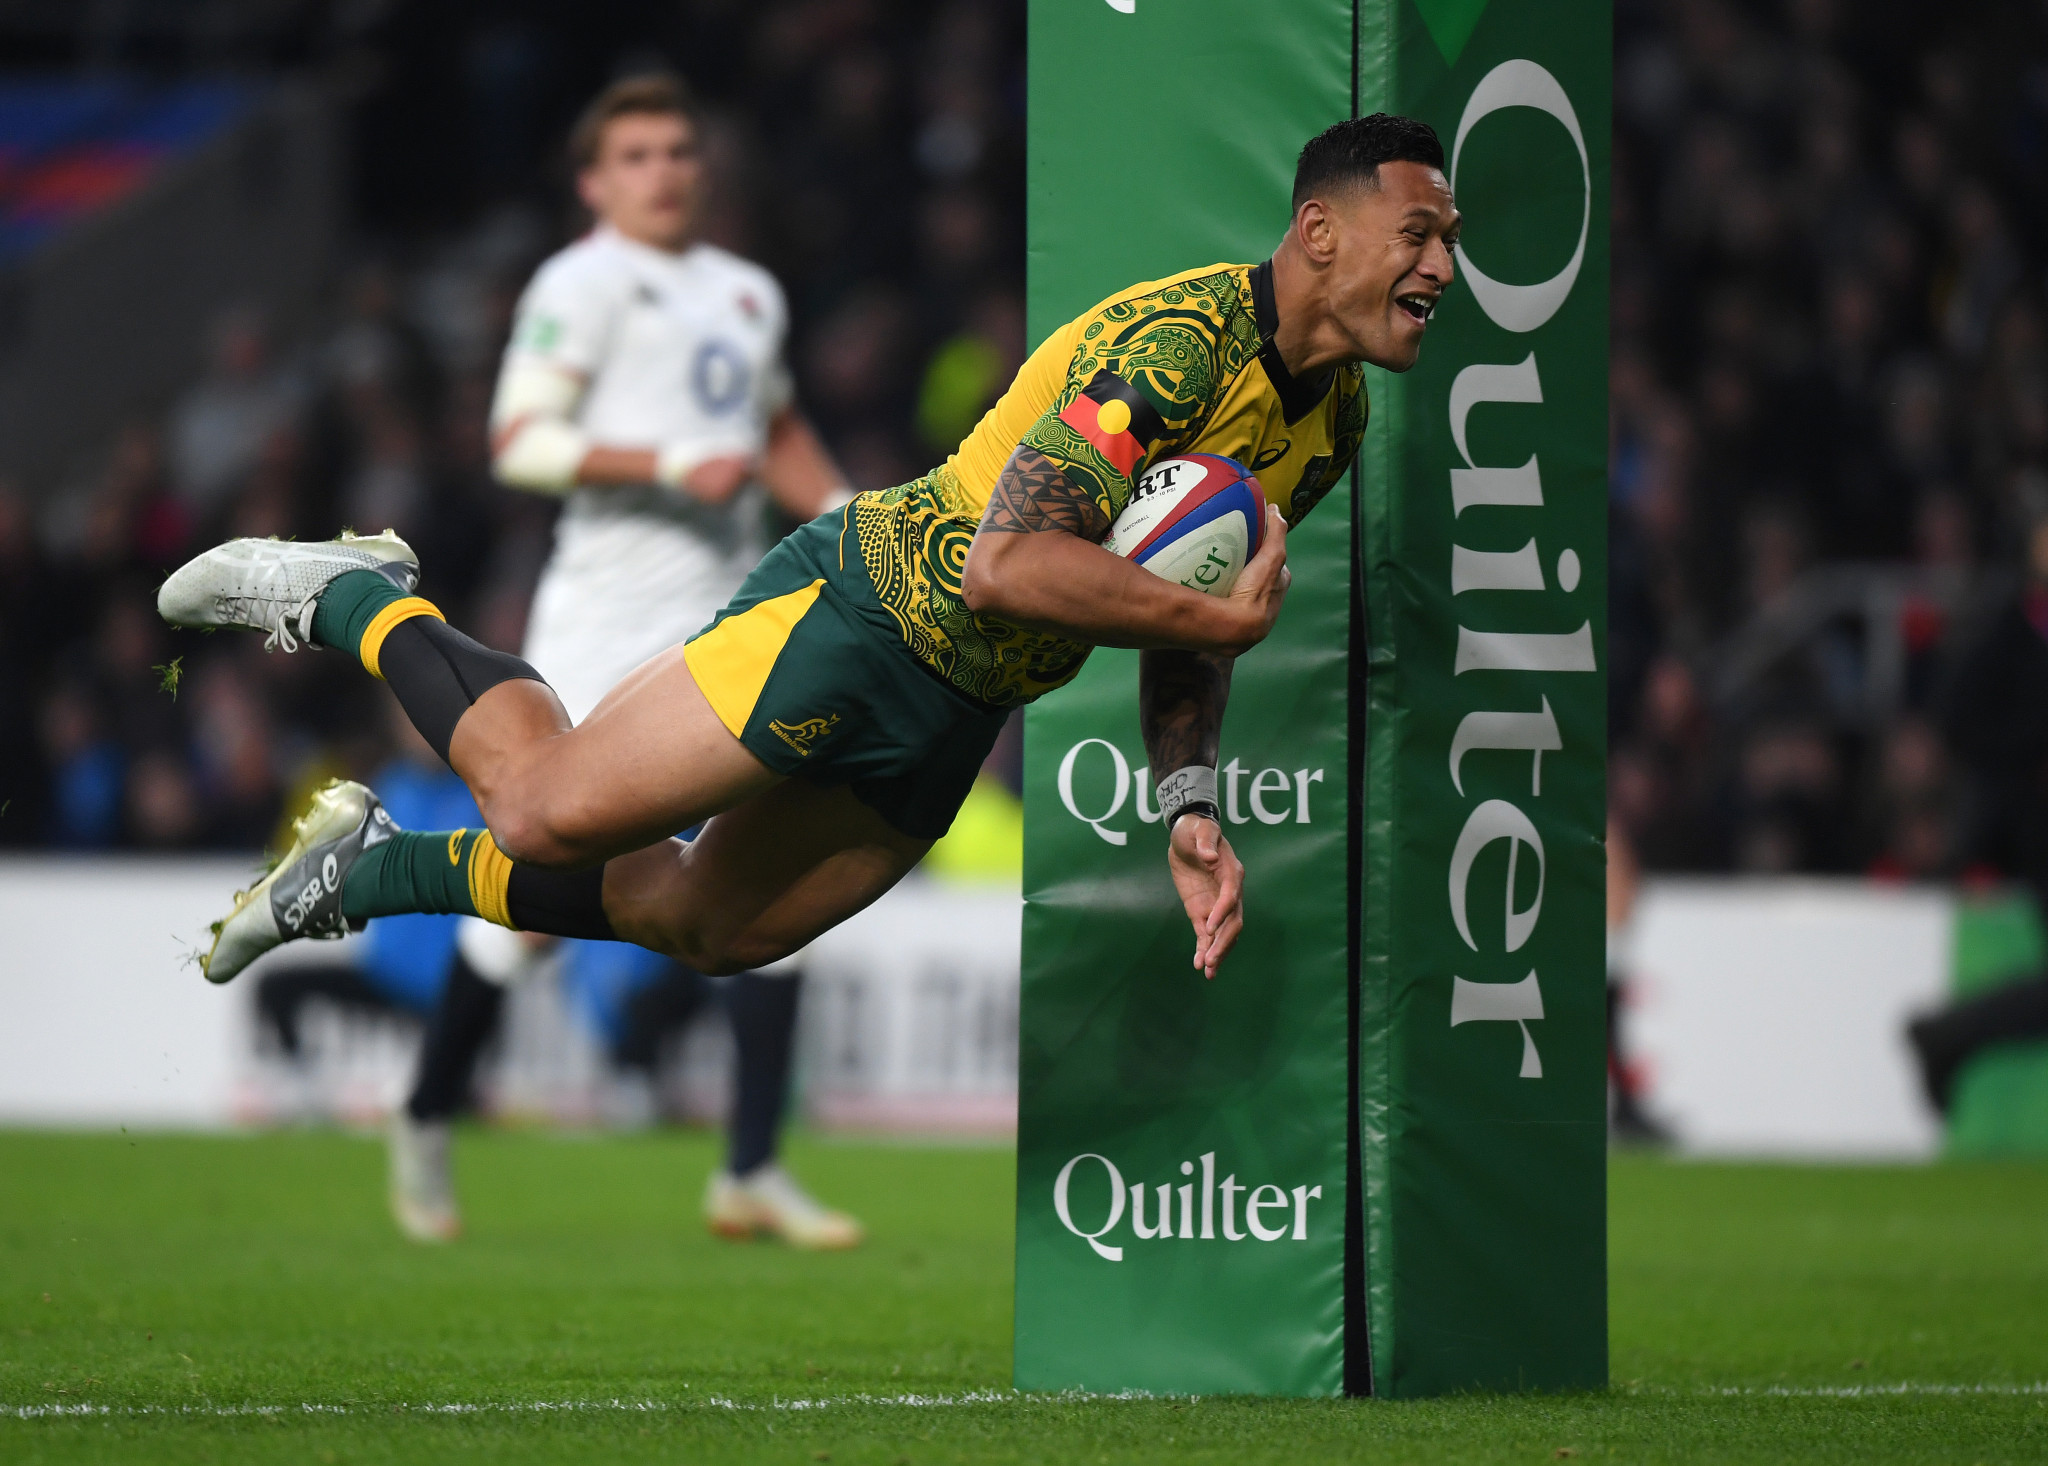 Israel Folau's career appears over after a three-person panel upheld the decision from Rugby Australia to sack the player ©Getty Images